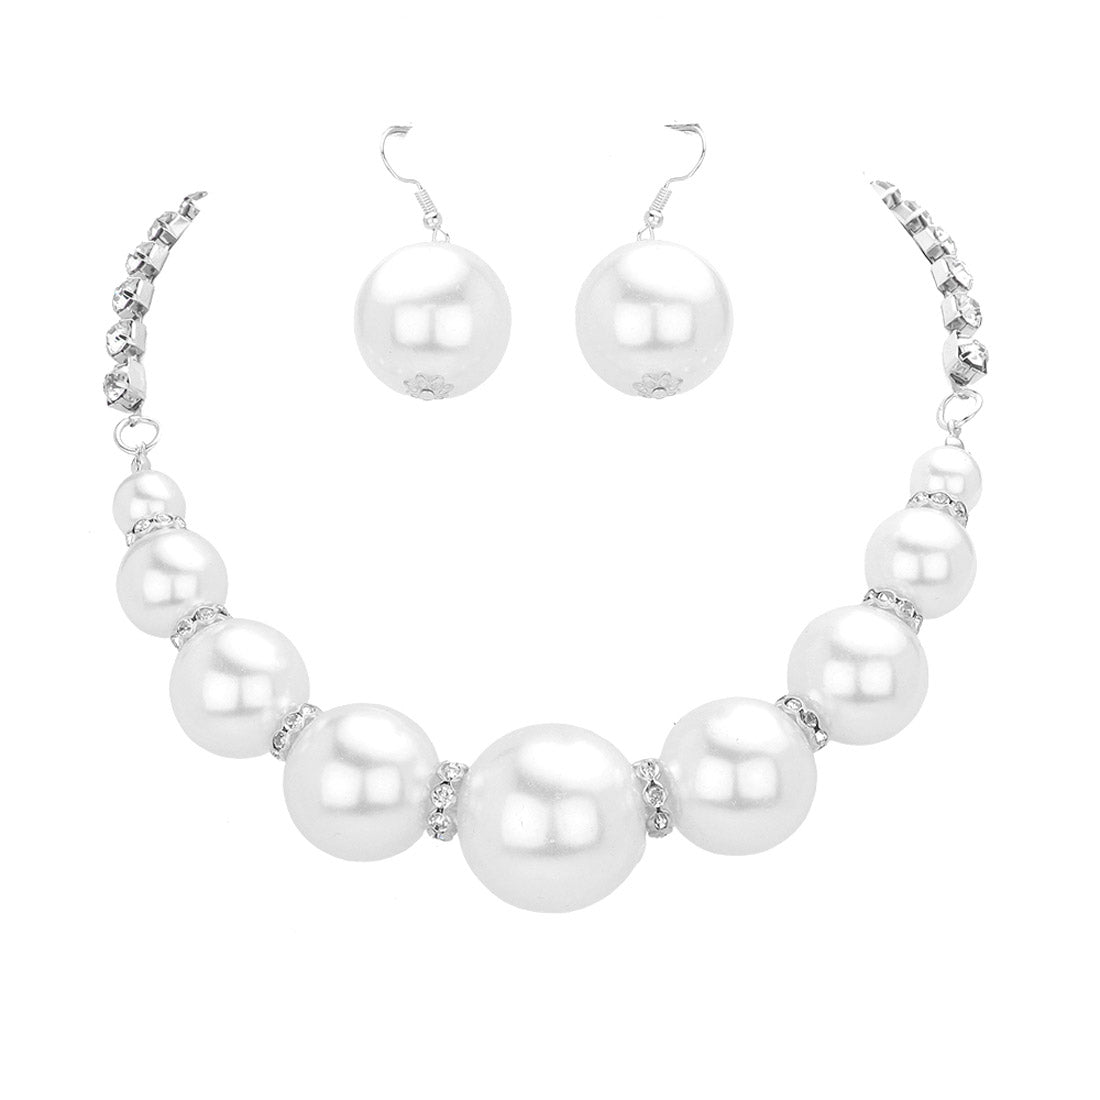 Gold, Clear, Cream Multi Sized Pearl Round Stone Necklace Earring Set is boasting an exquisite range of pearls of varying sizes, this necklace will add a gorgeous touch of class and sophistication to any outfit. Perfect for parties, Weddings, Birthday Gift, Anniversary, Christmas Gift, Regalos de: Cumpleanos, Navidad, Anniversario, etc